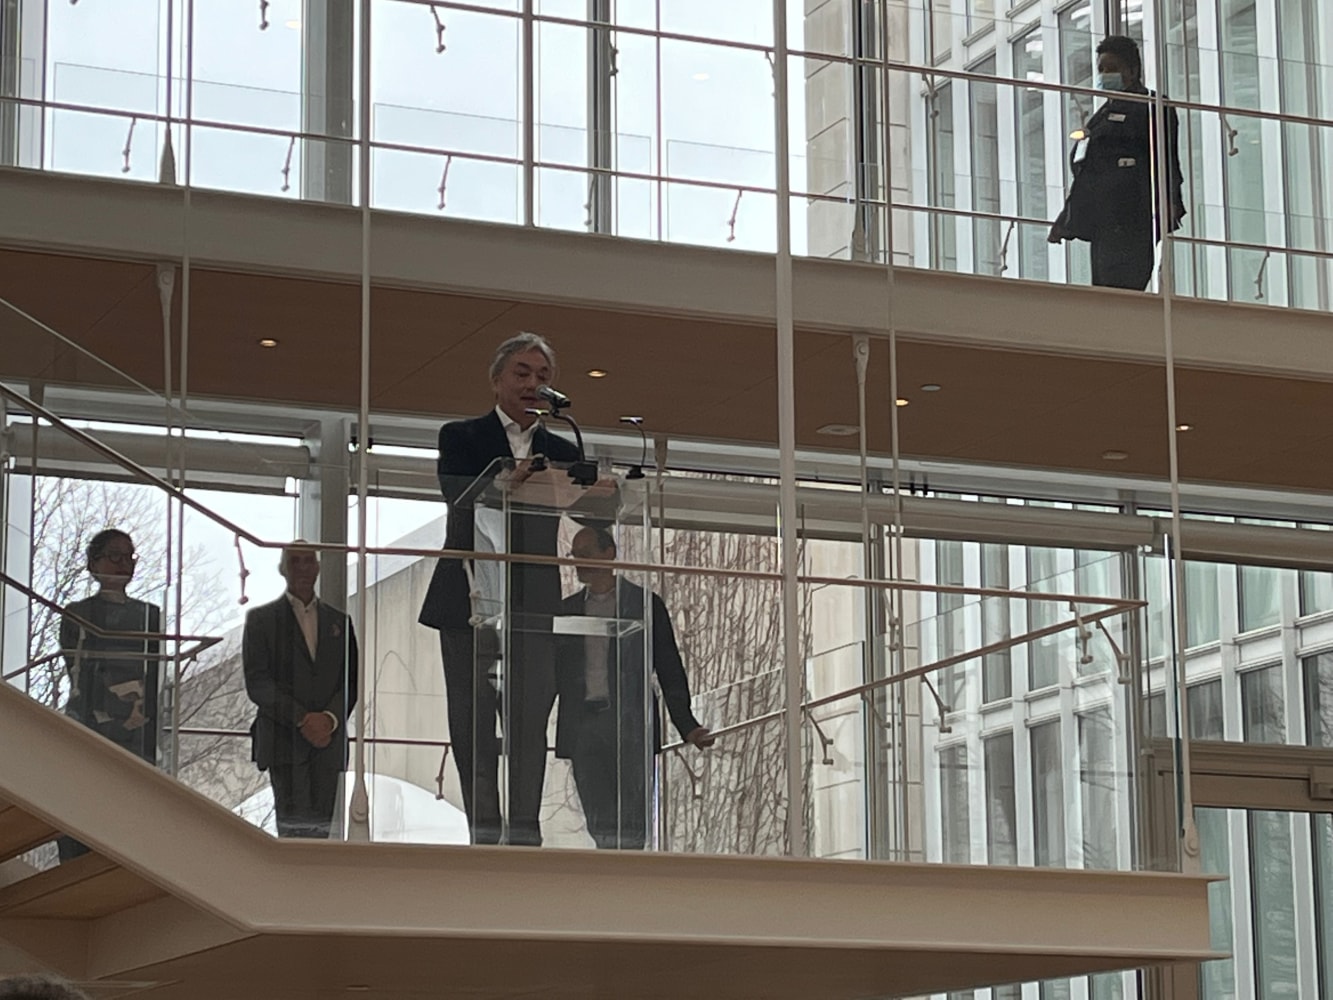 At The Art Institute of Chicago, there was an event.&amp;nbsp;I made a speech at the event.&amp;nbsp;Exhibition &amp;ldquo;Senju&amp;rsquo;s Waterfall for Chicago&amp;rdquo; is extended till the end of June.